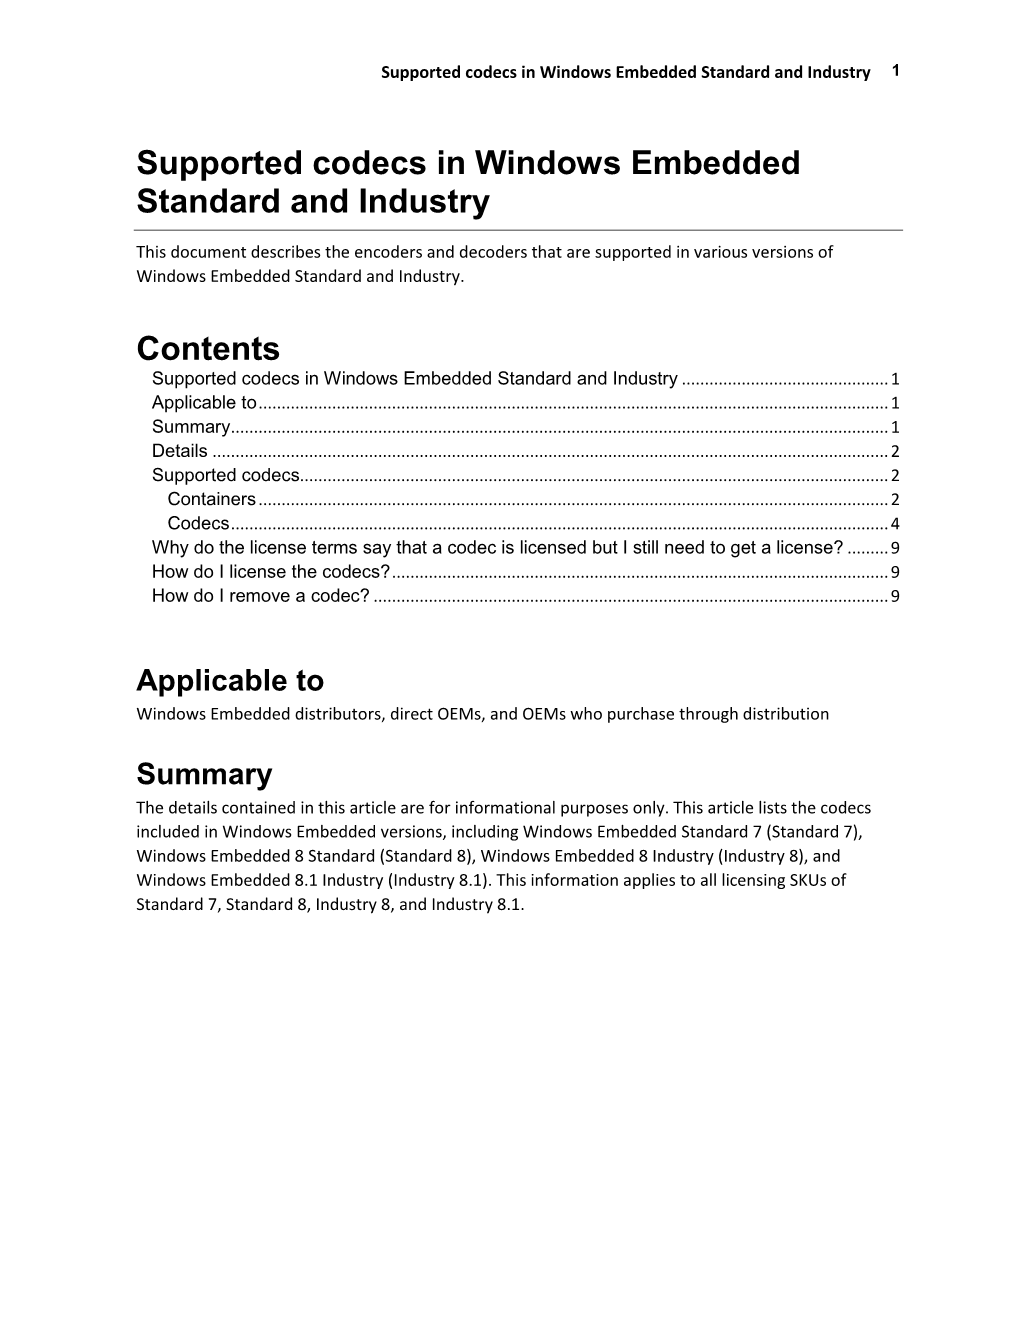 Supported Codecs in Windows Embedded Standard and Industry 1